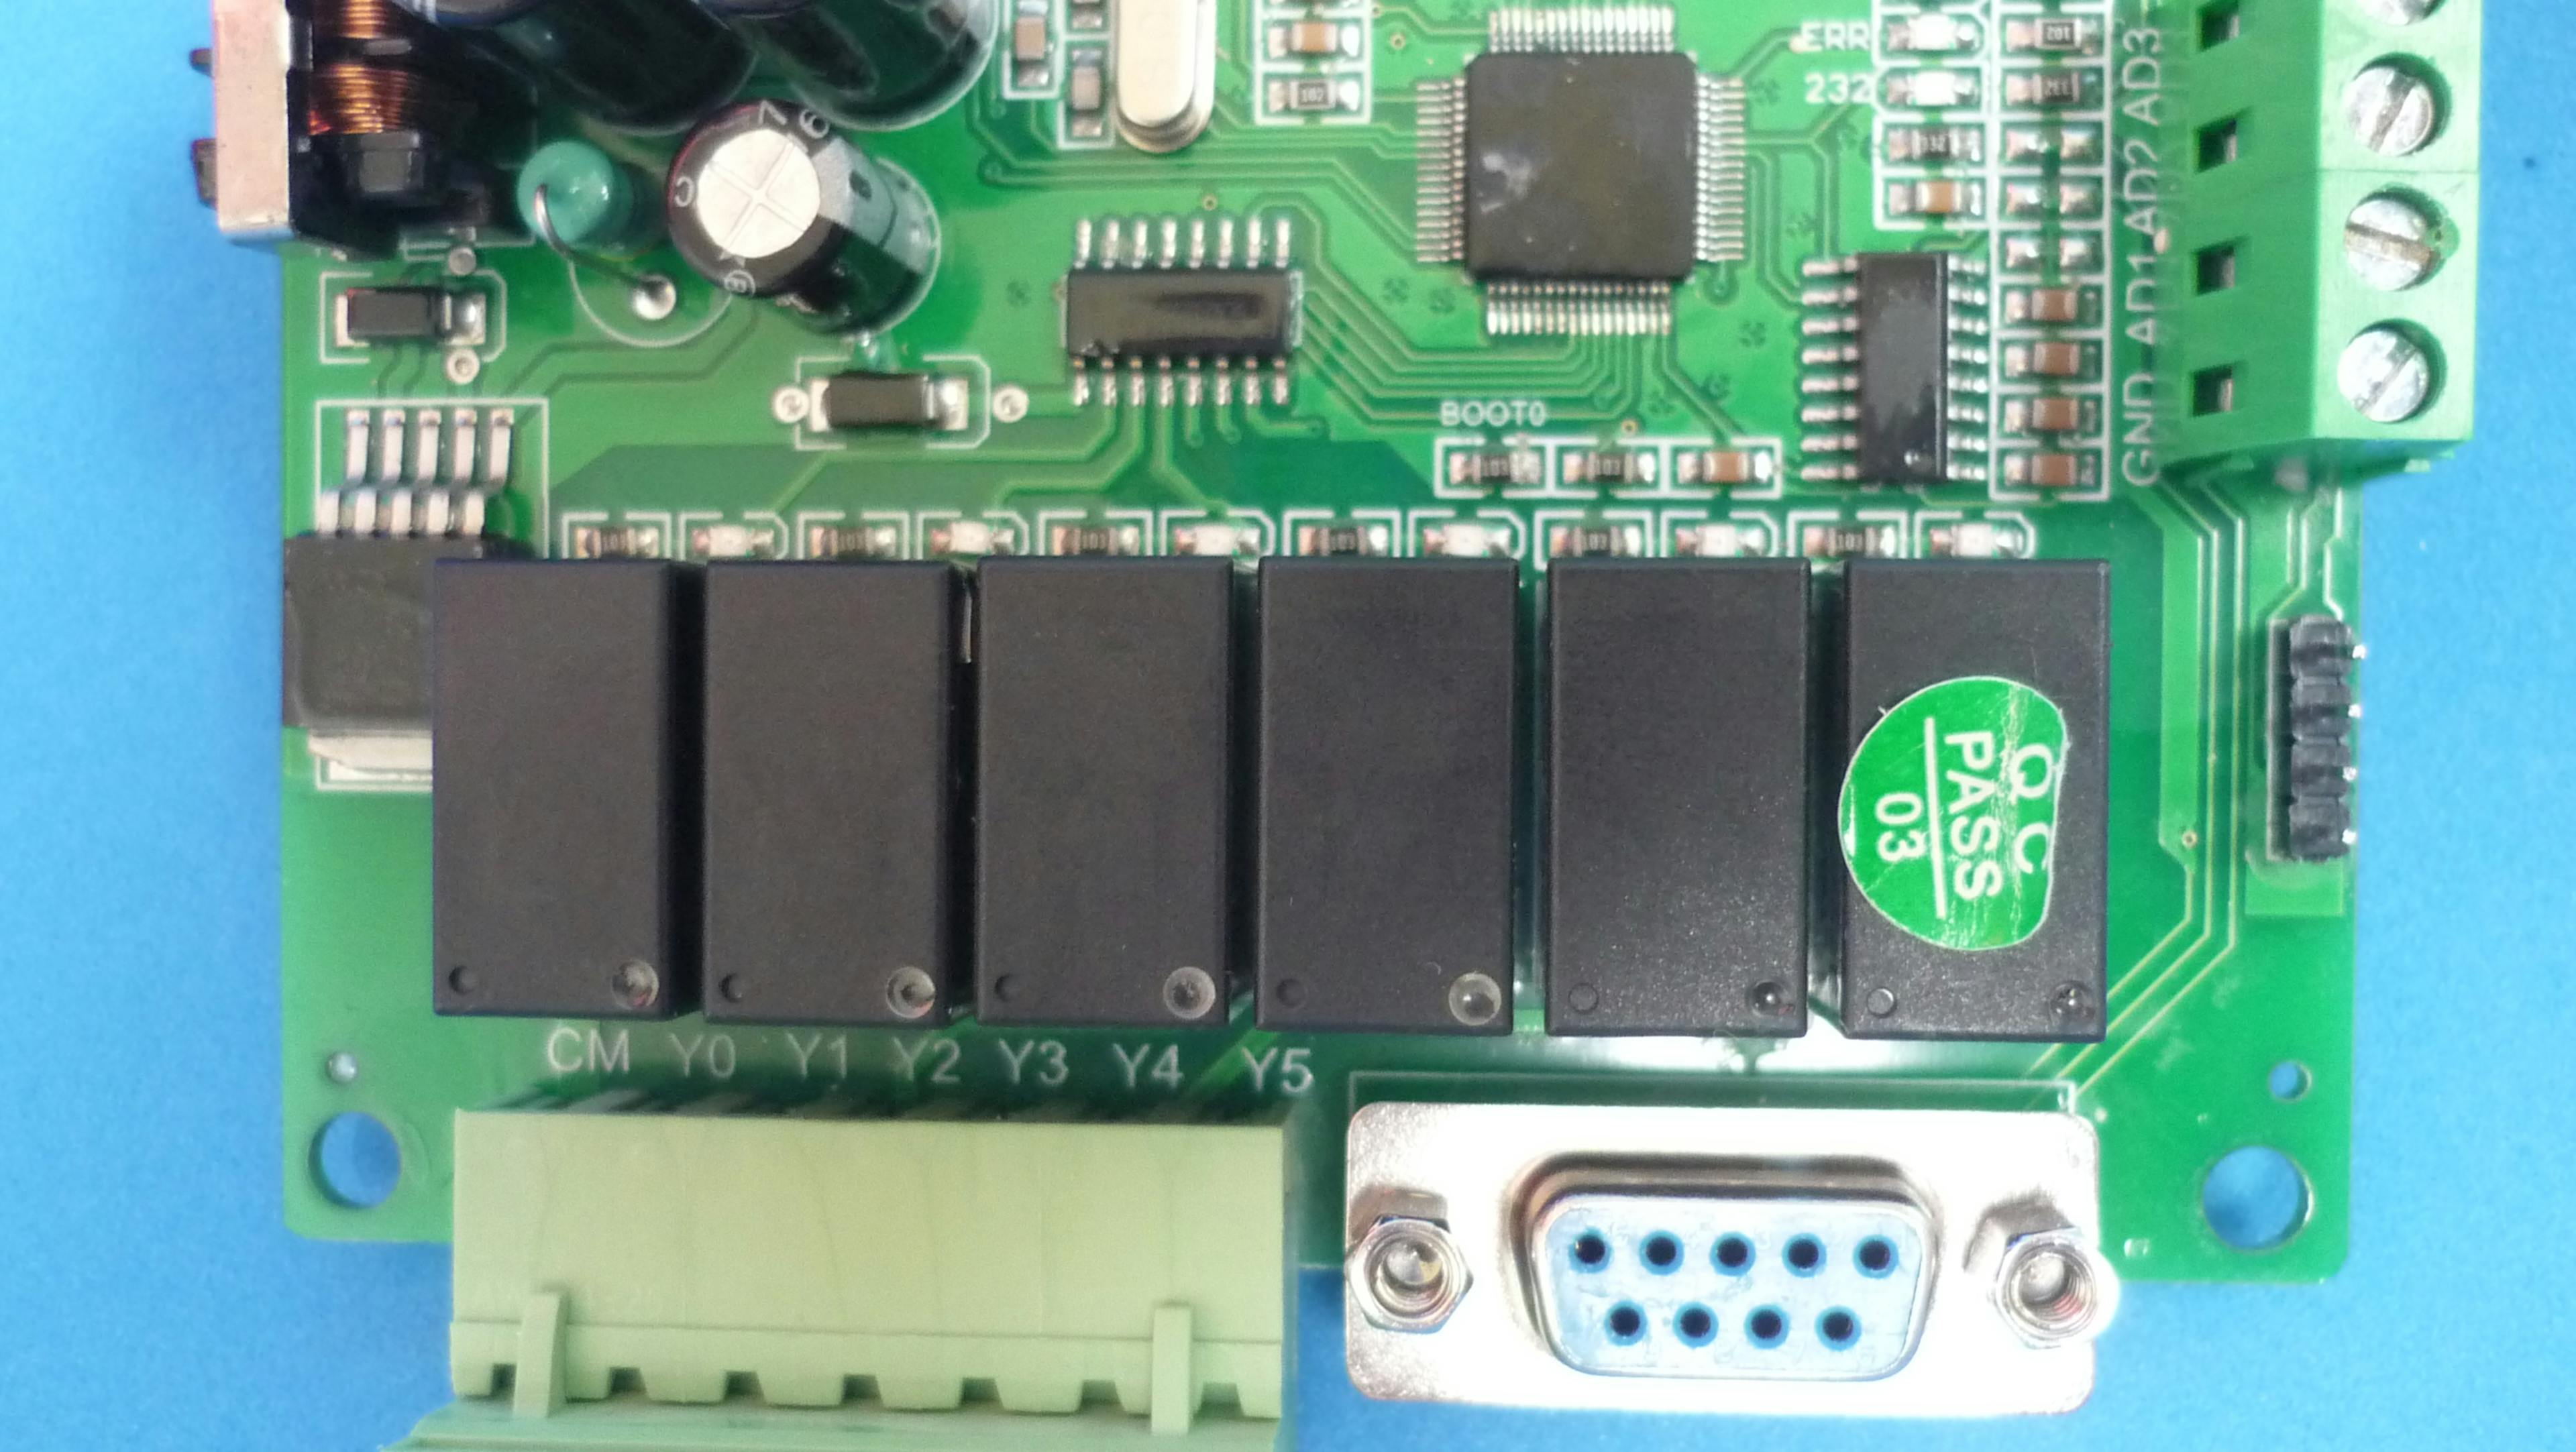 Serial port related components